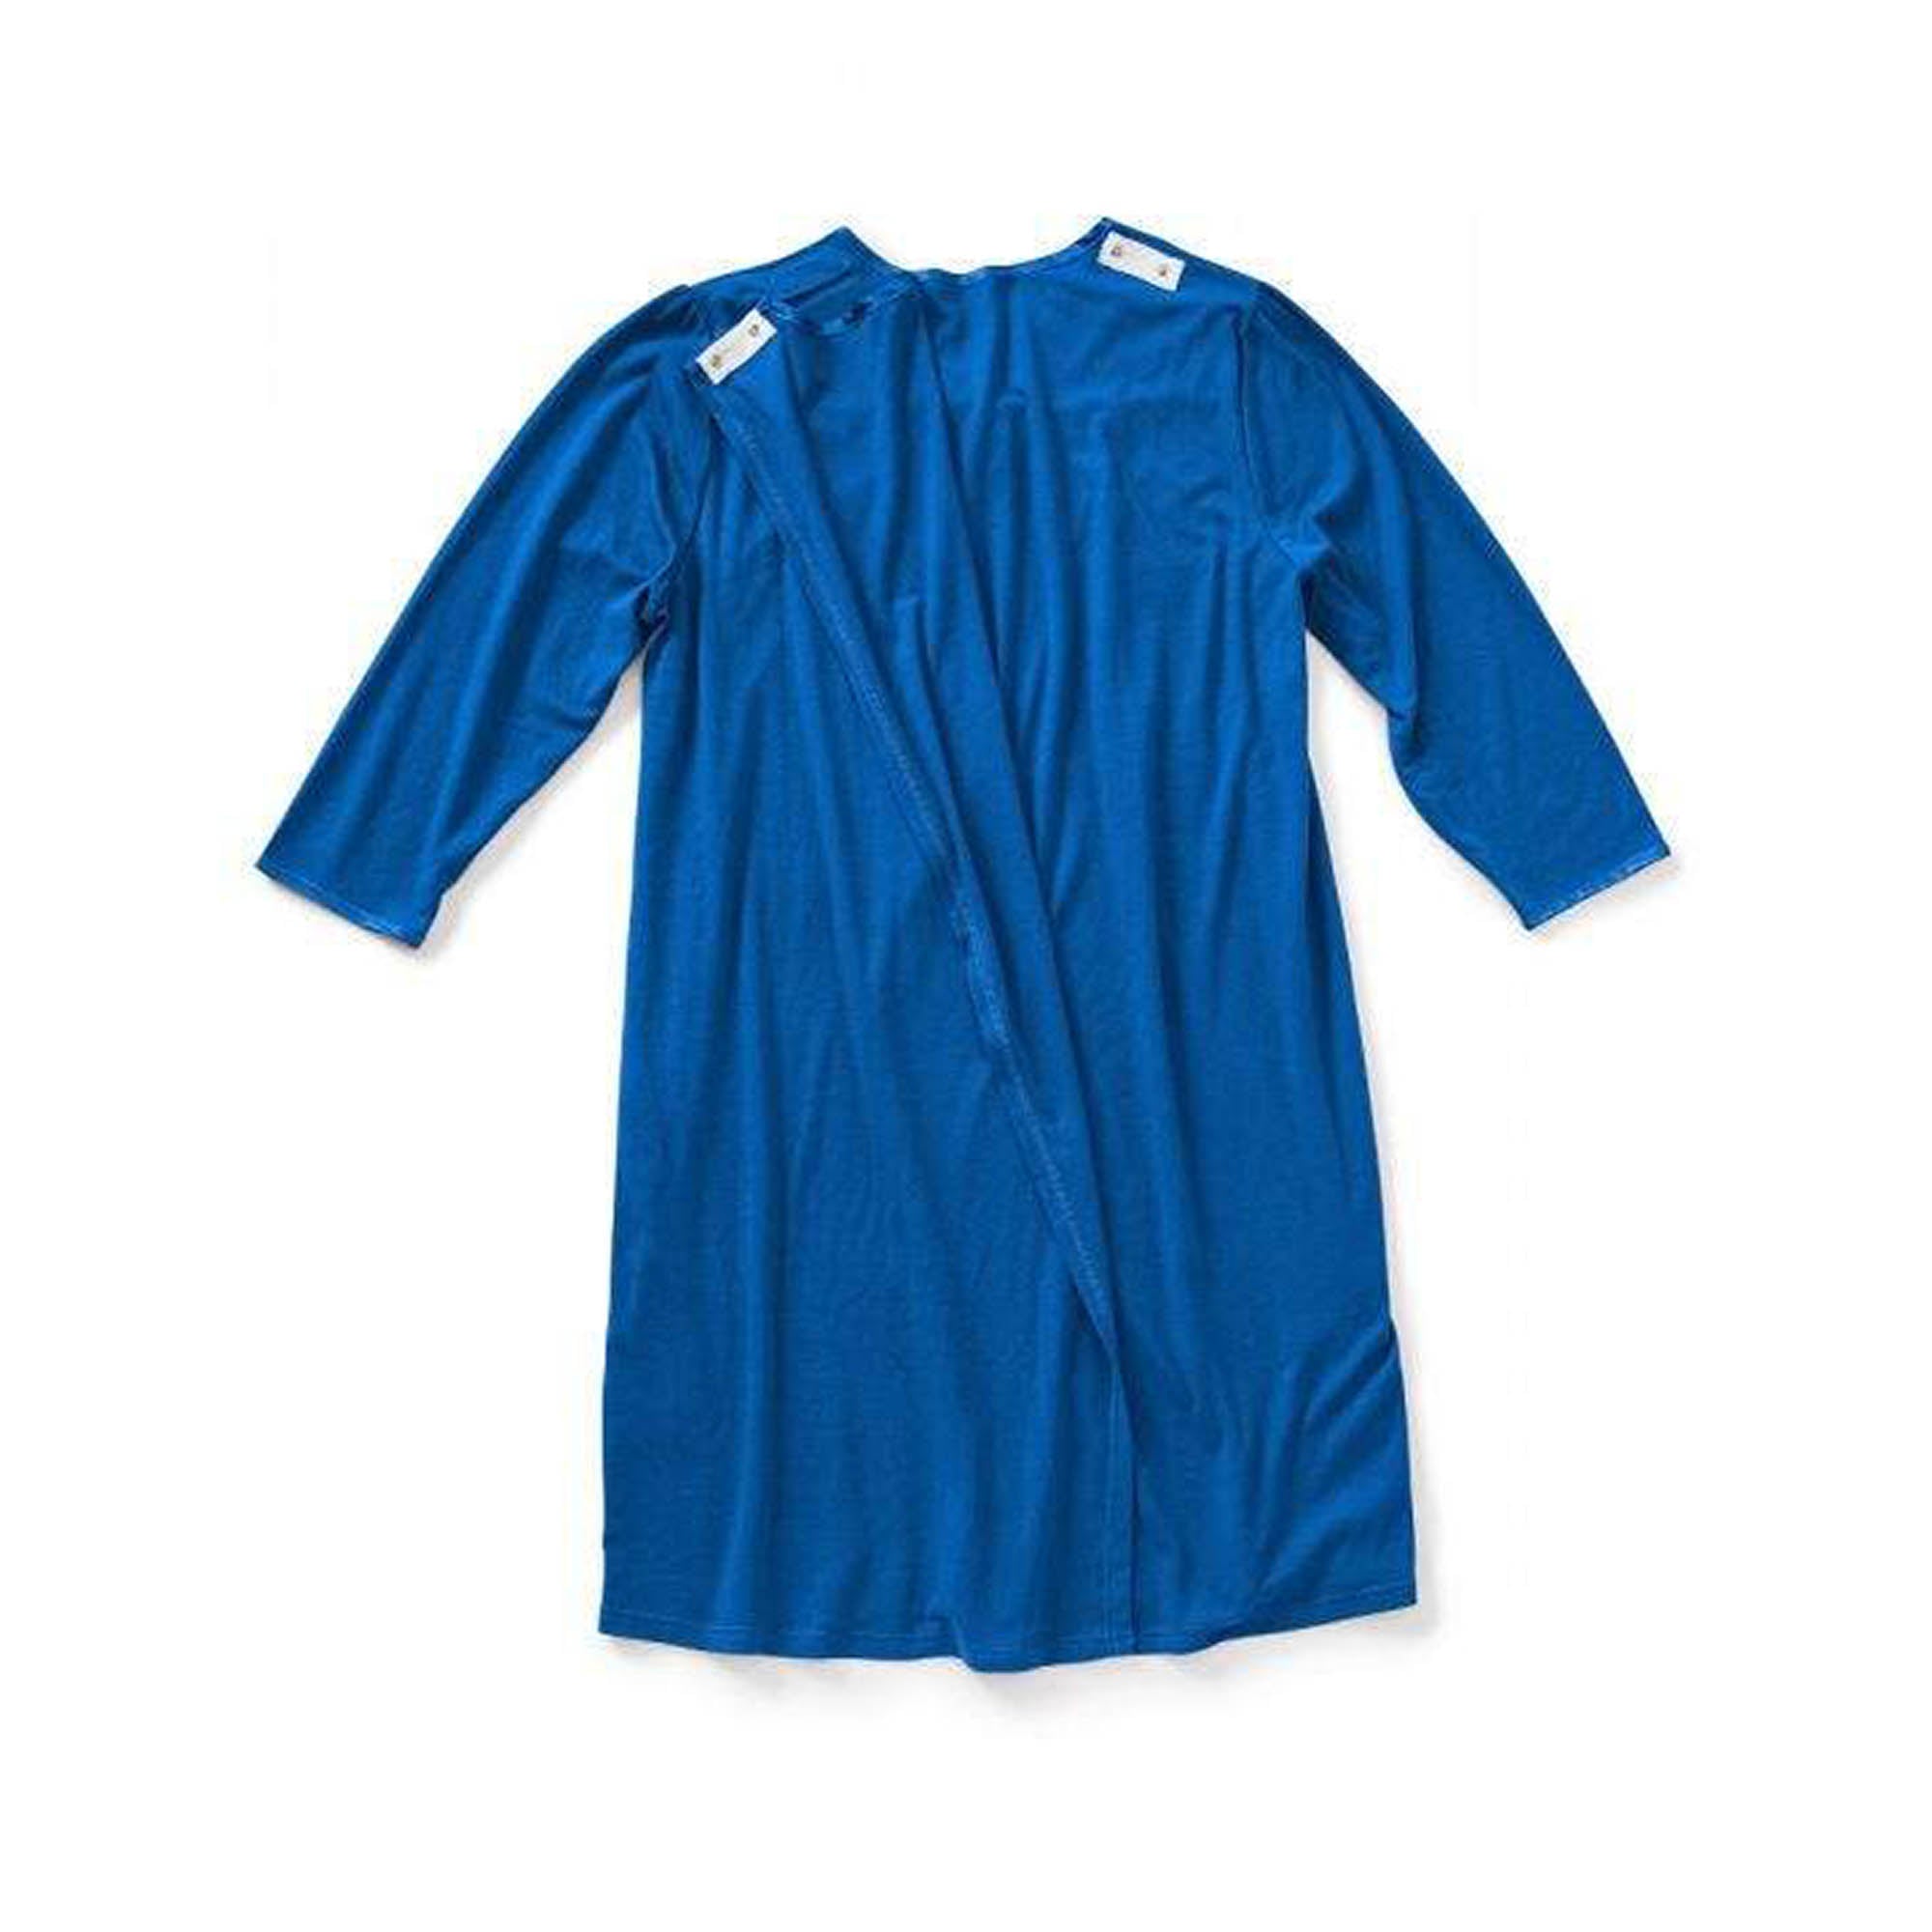 Silverts Women's Open Back Antimicrobial Long-sleeve Nightgown - Adaptive Clothing - Blue - XS